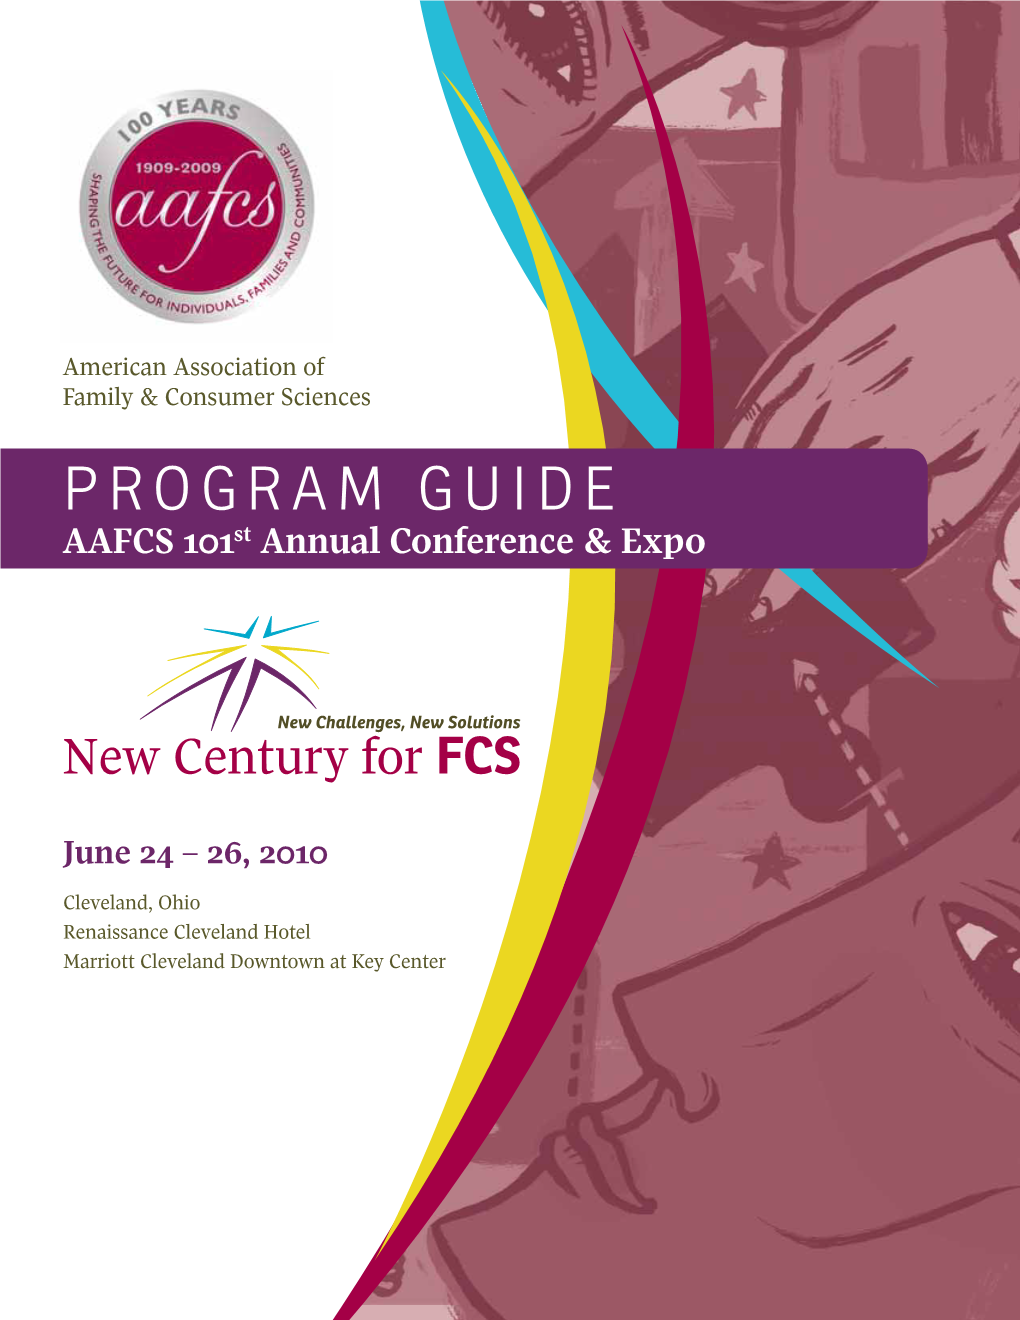 PROGRAM GUIDE AAFCS 101St Annual Conference & Expo